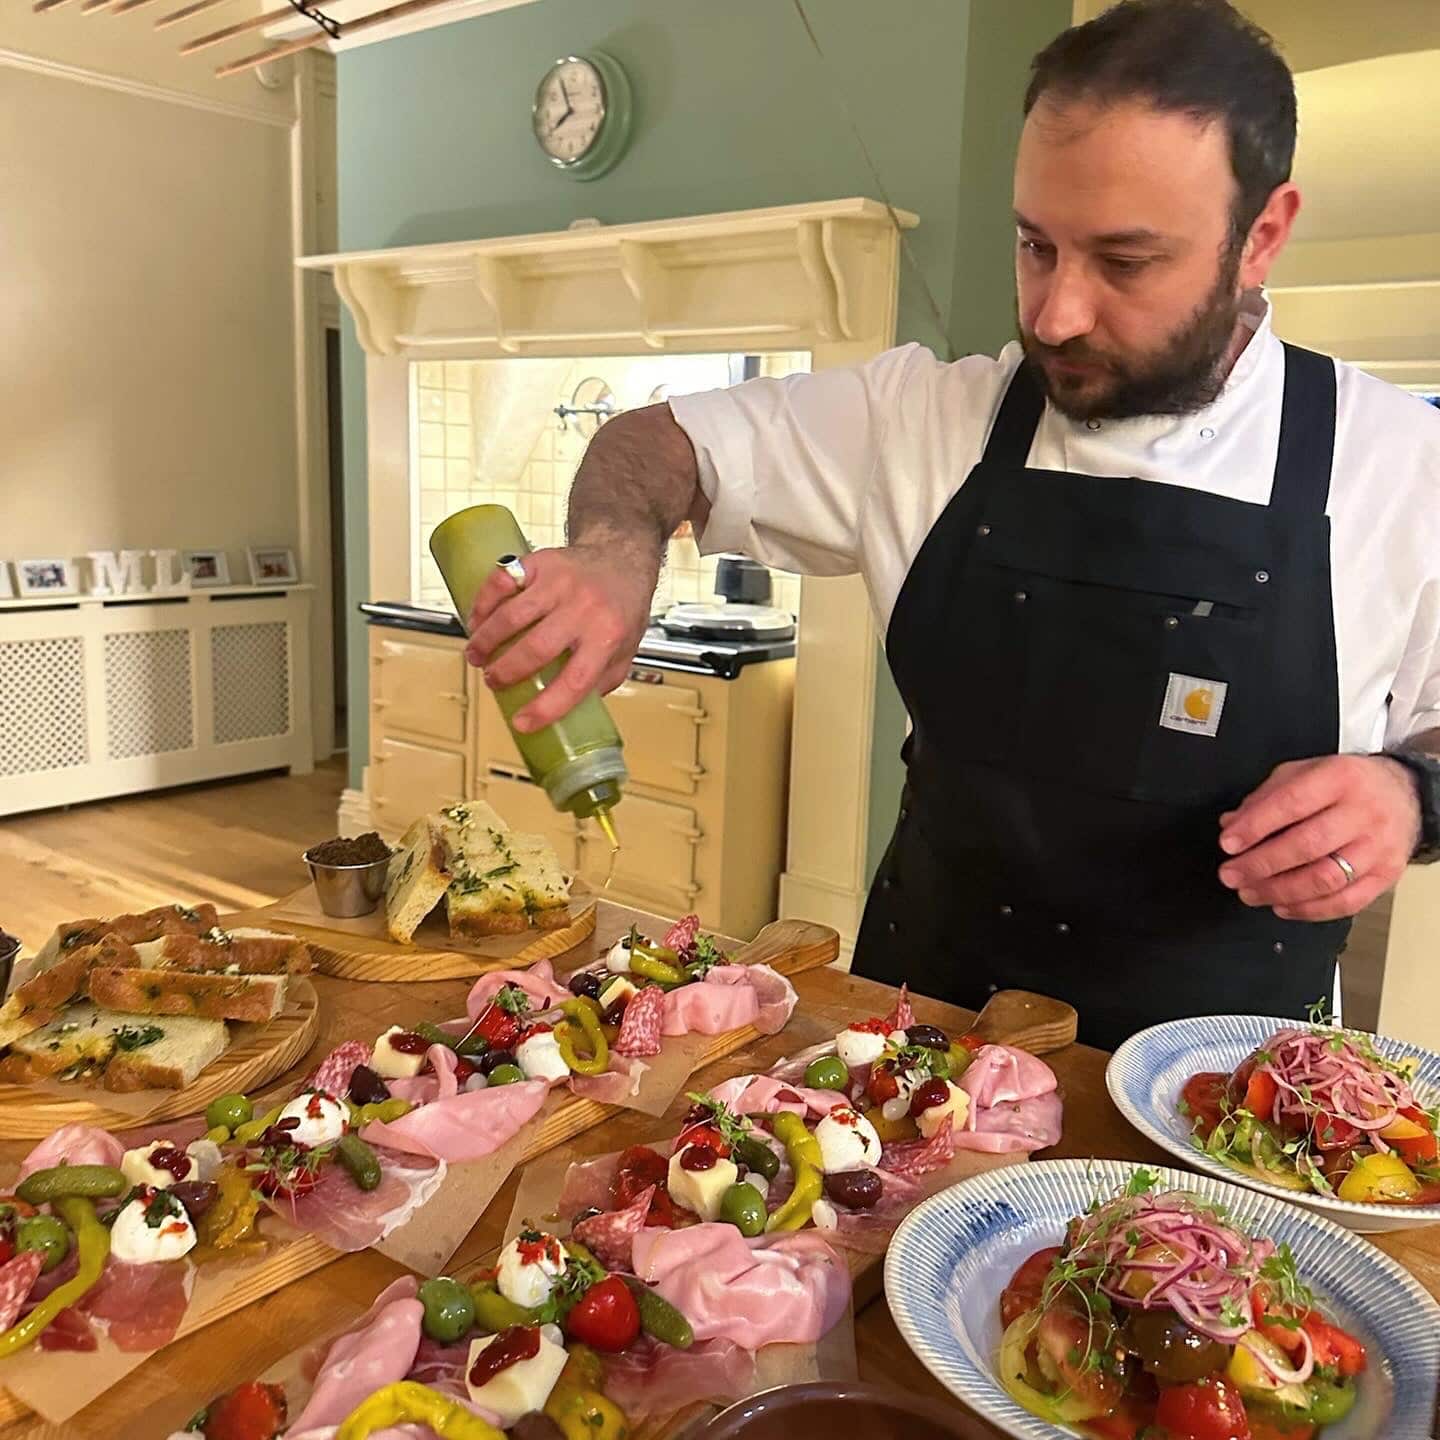 Chef assembling charcuterie boards with cured meats and seasoning.